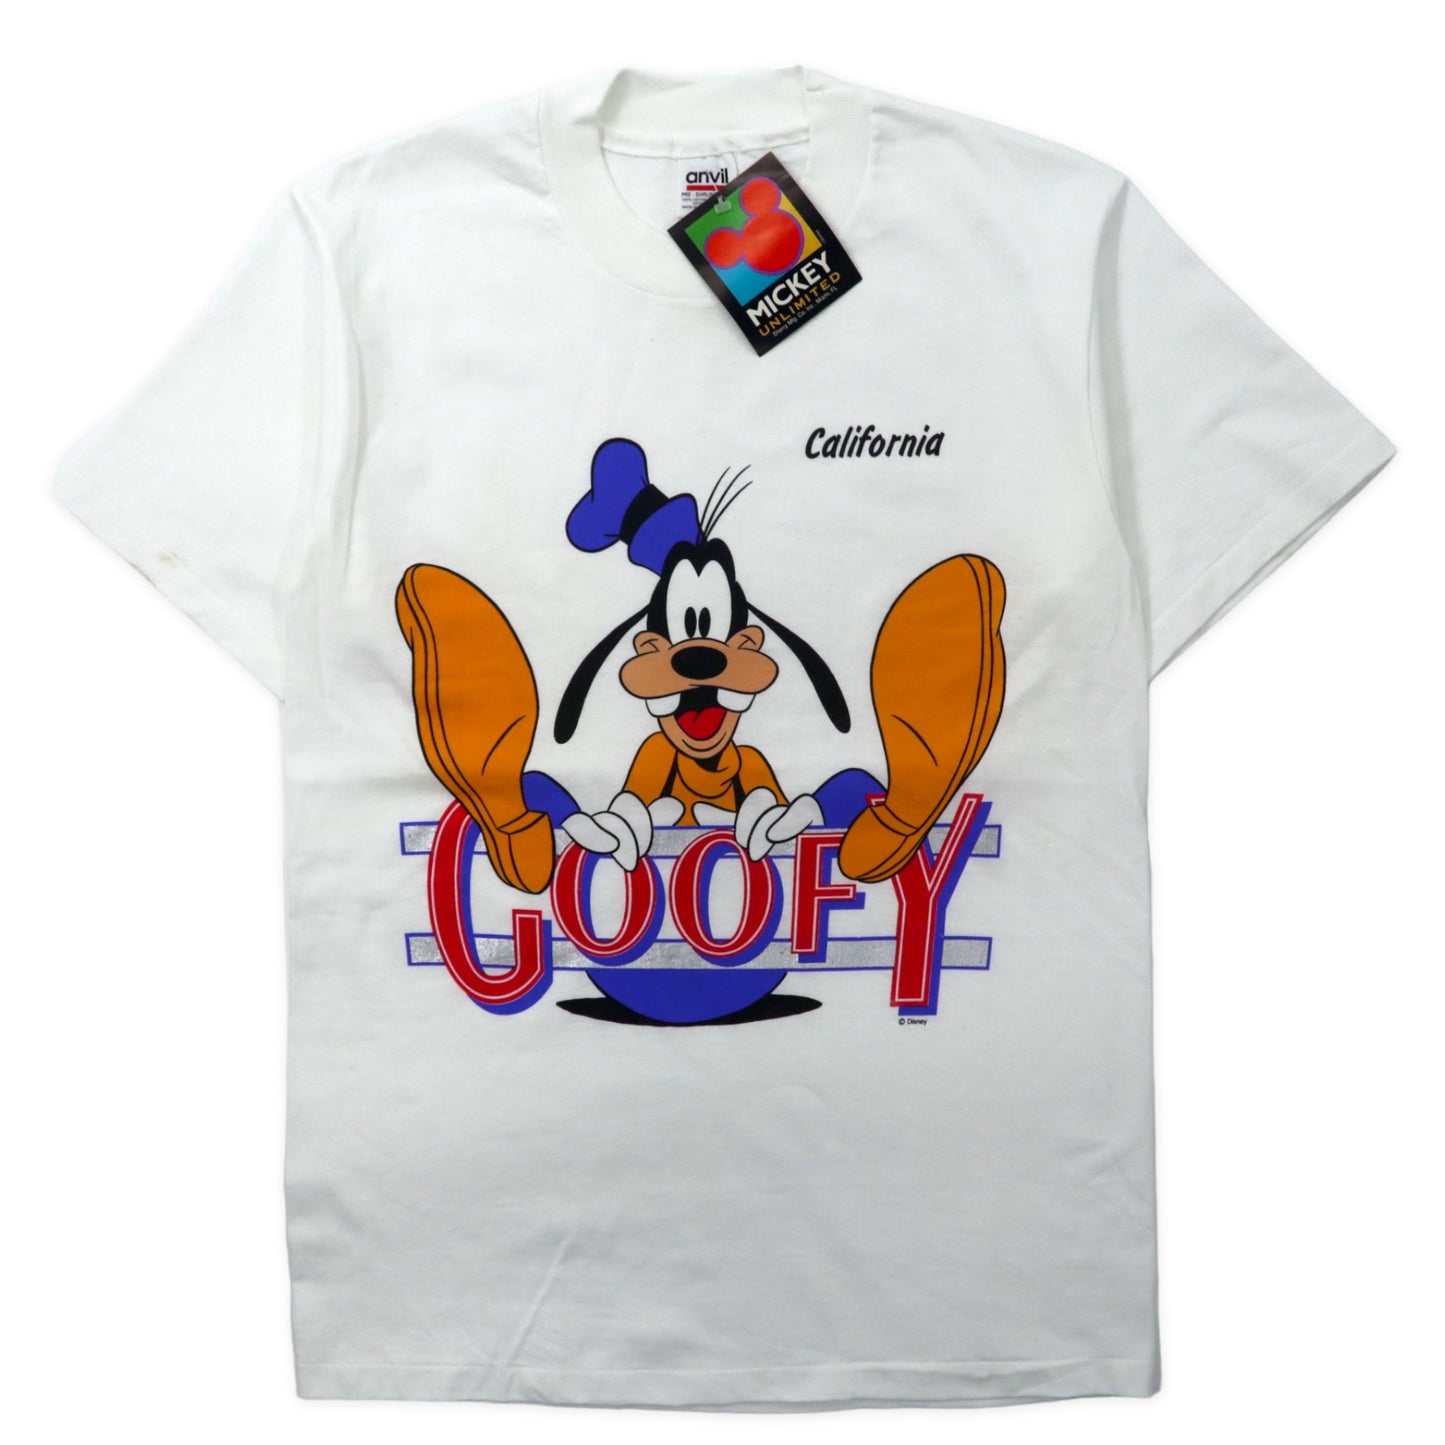 USA MADE 90's MICKEY UNLIMITED Character Print T -shirt M White Cotton  Anvil Body GOOFY Goofy Unused